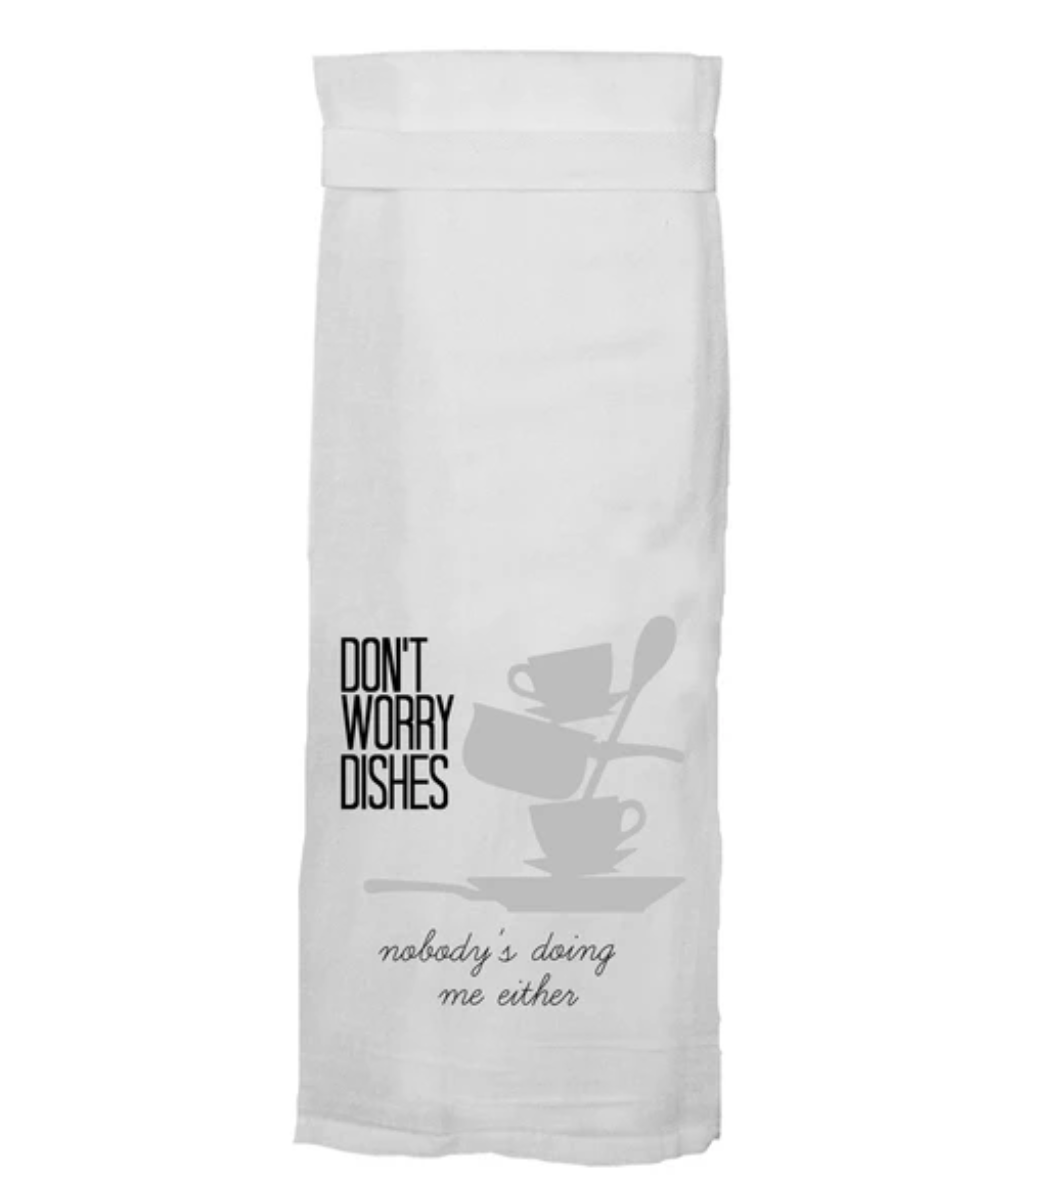 Twisted Wares Sells Novelty Wholesale KItchen Towels 214-491-4911